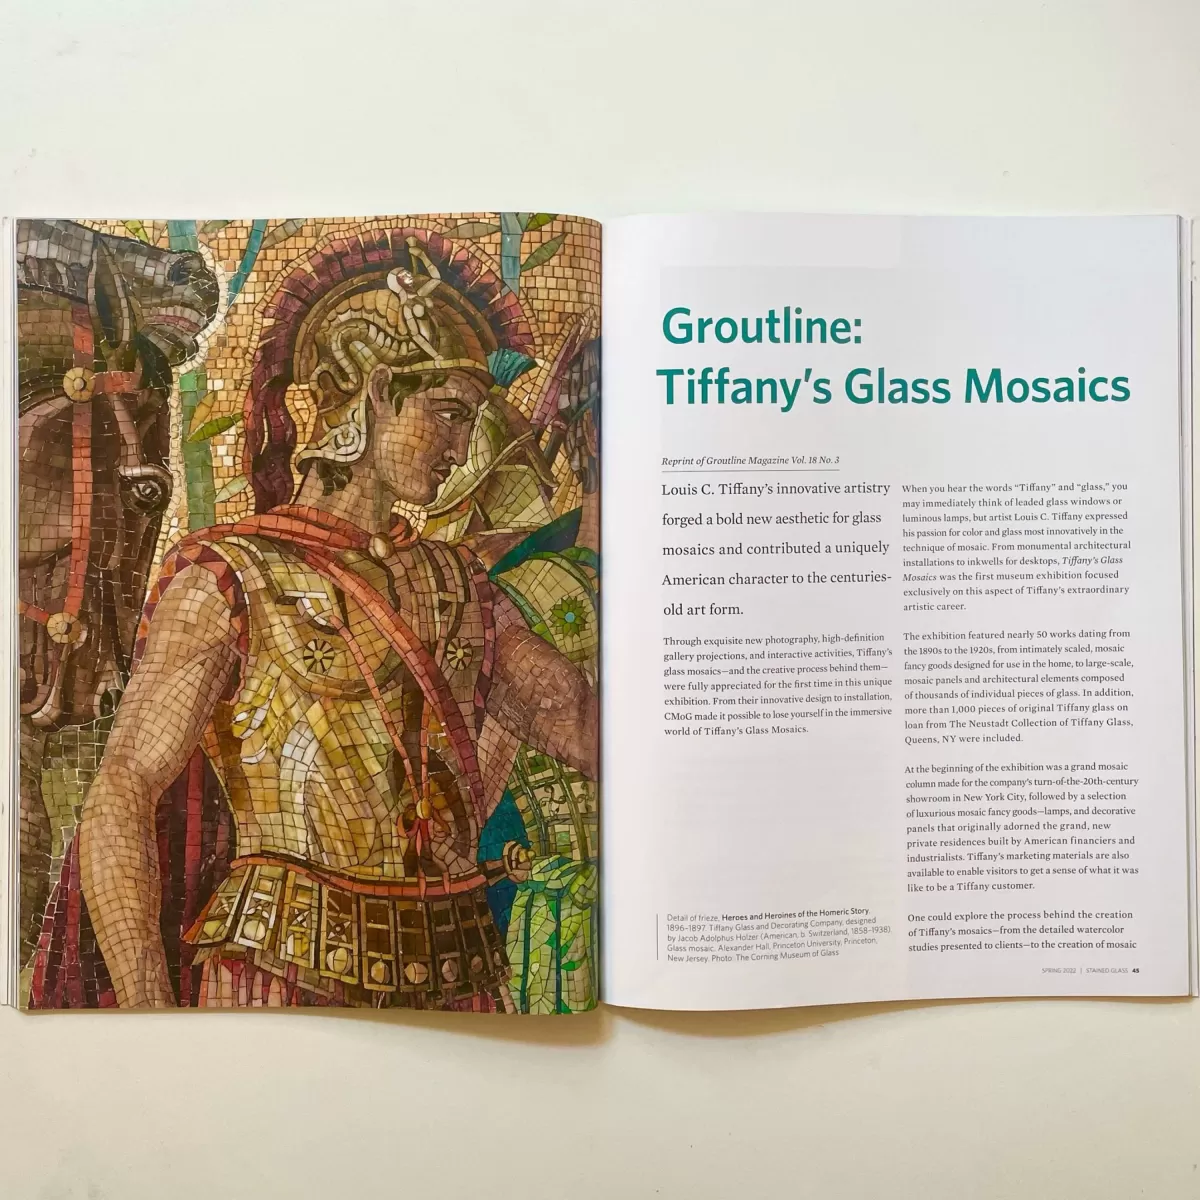 Stained Glass Quarterly, Spring 2022 spread, Groutline: Tiffany's Glass Mosaics